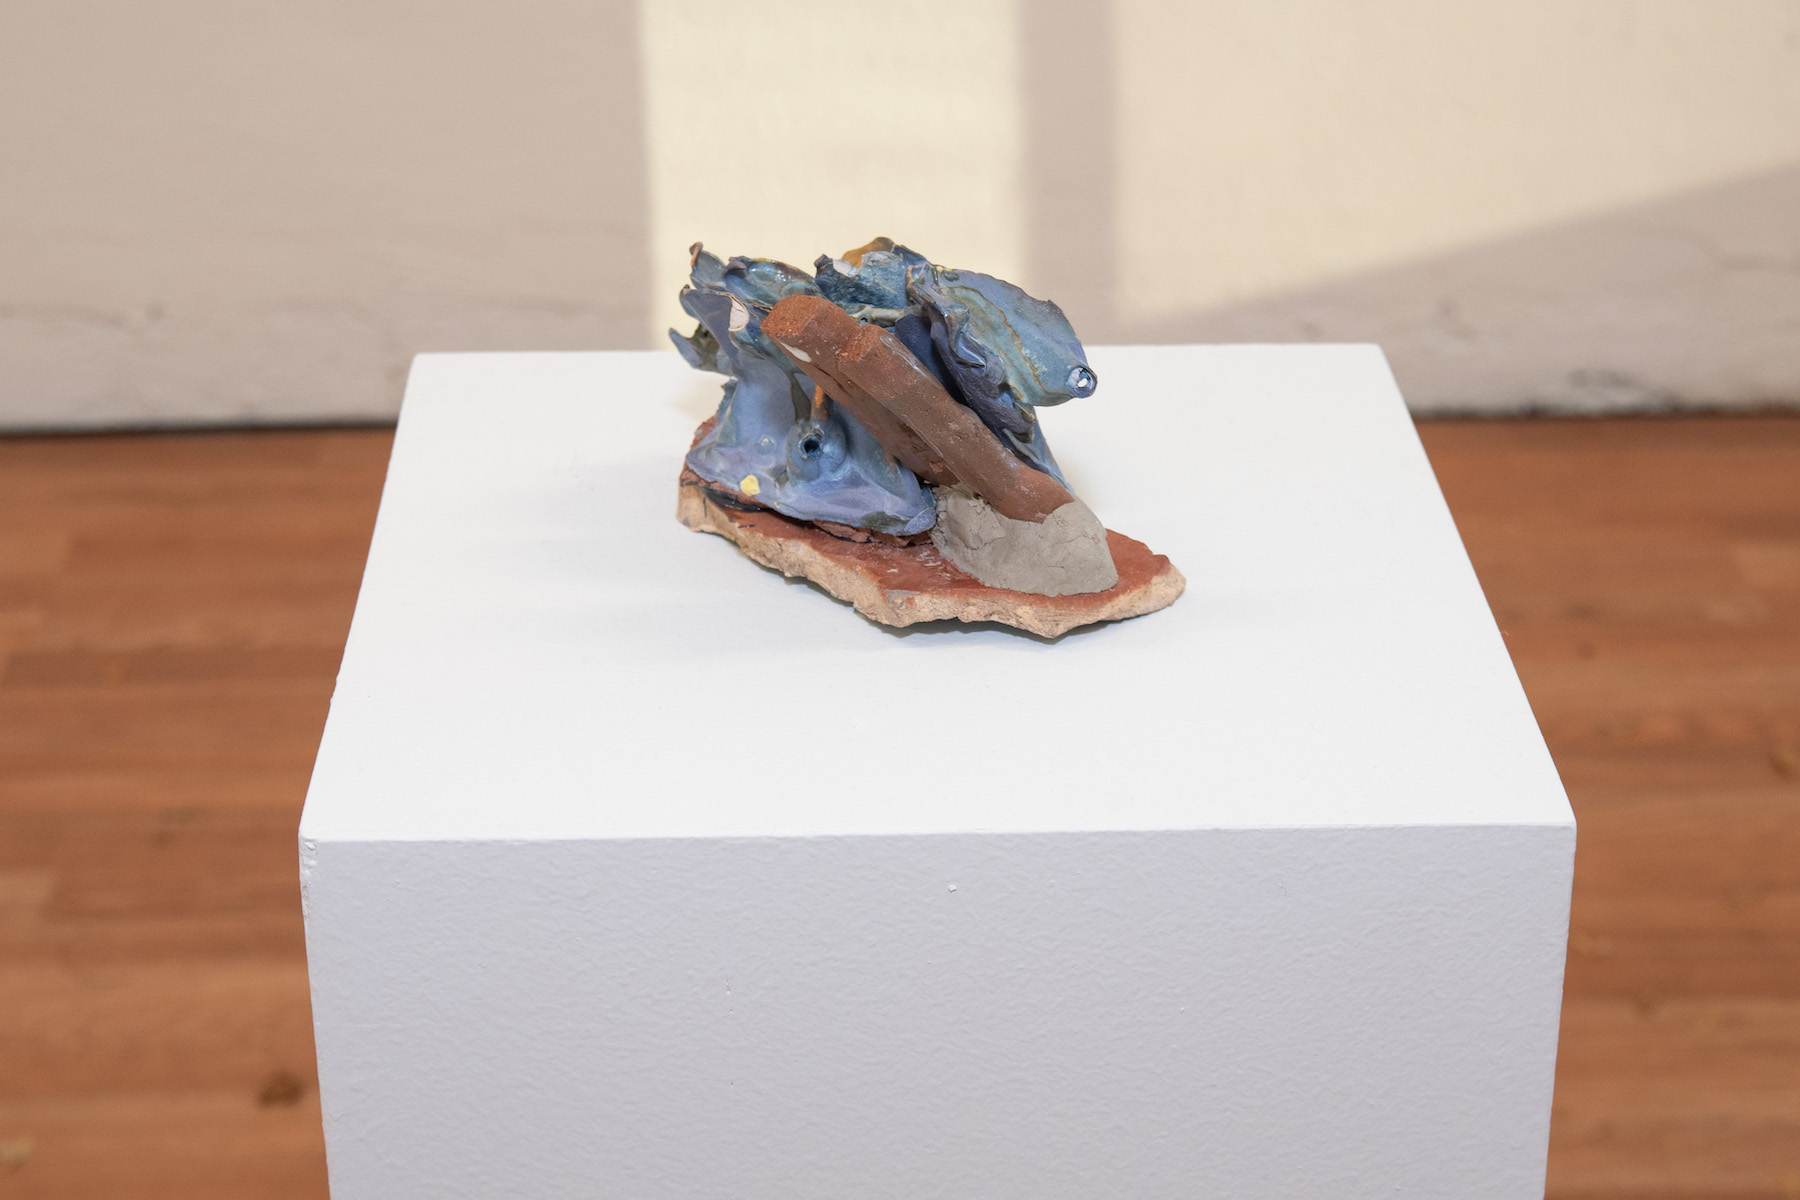 casted form of various objects, glazed with blues & browns